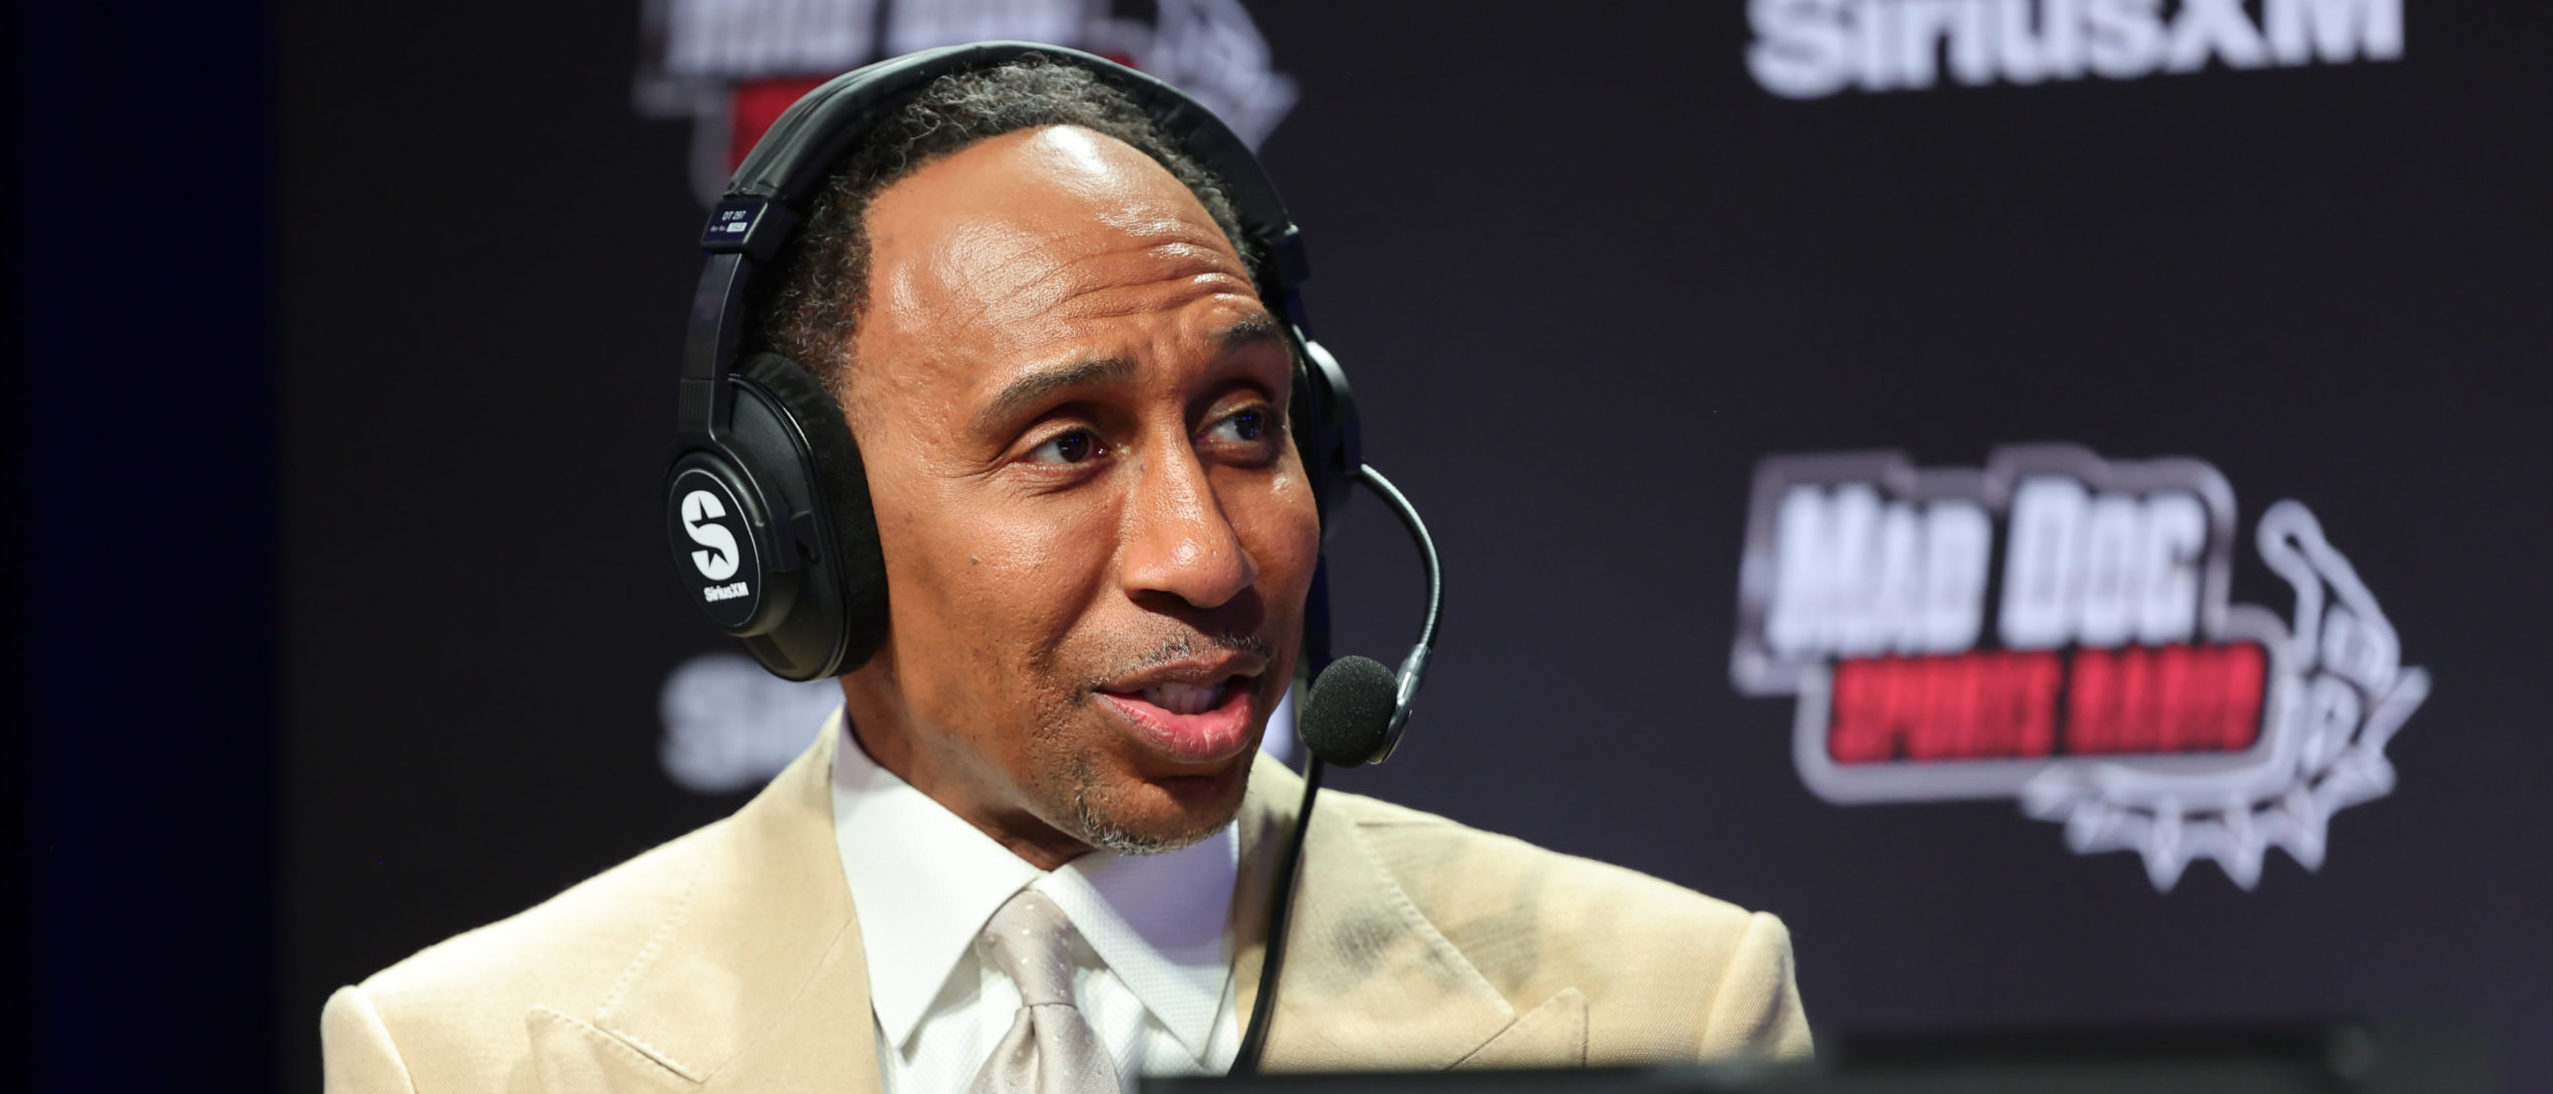 Documented Horndog Stephen A. Smith Says He Has To Be ‘Polished’ On ESPN Because He’s Black